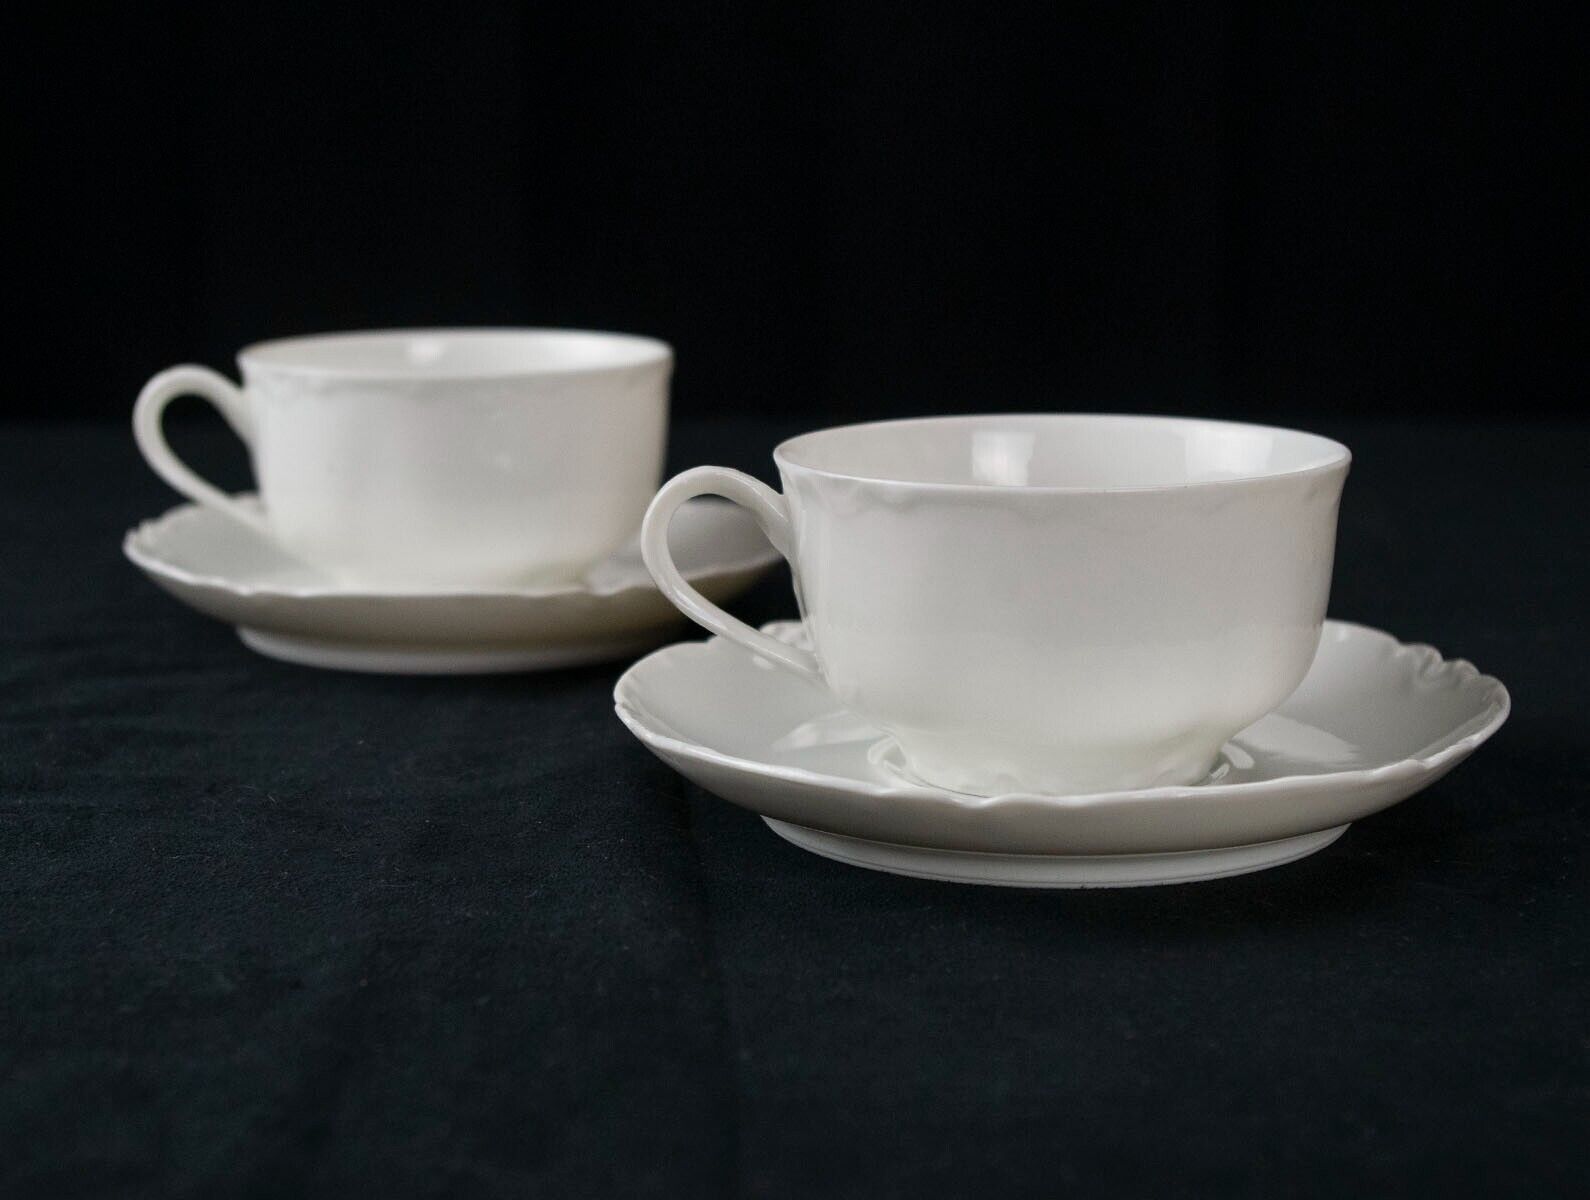 Primary image for Haviland Limoges Ranson All White Cups & Saucers, 2 Sets, Antique France Blank 1